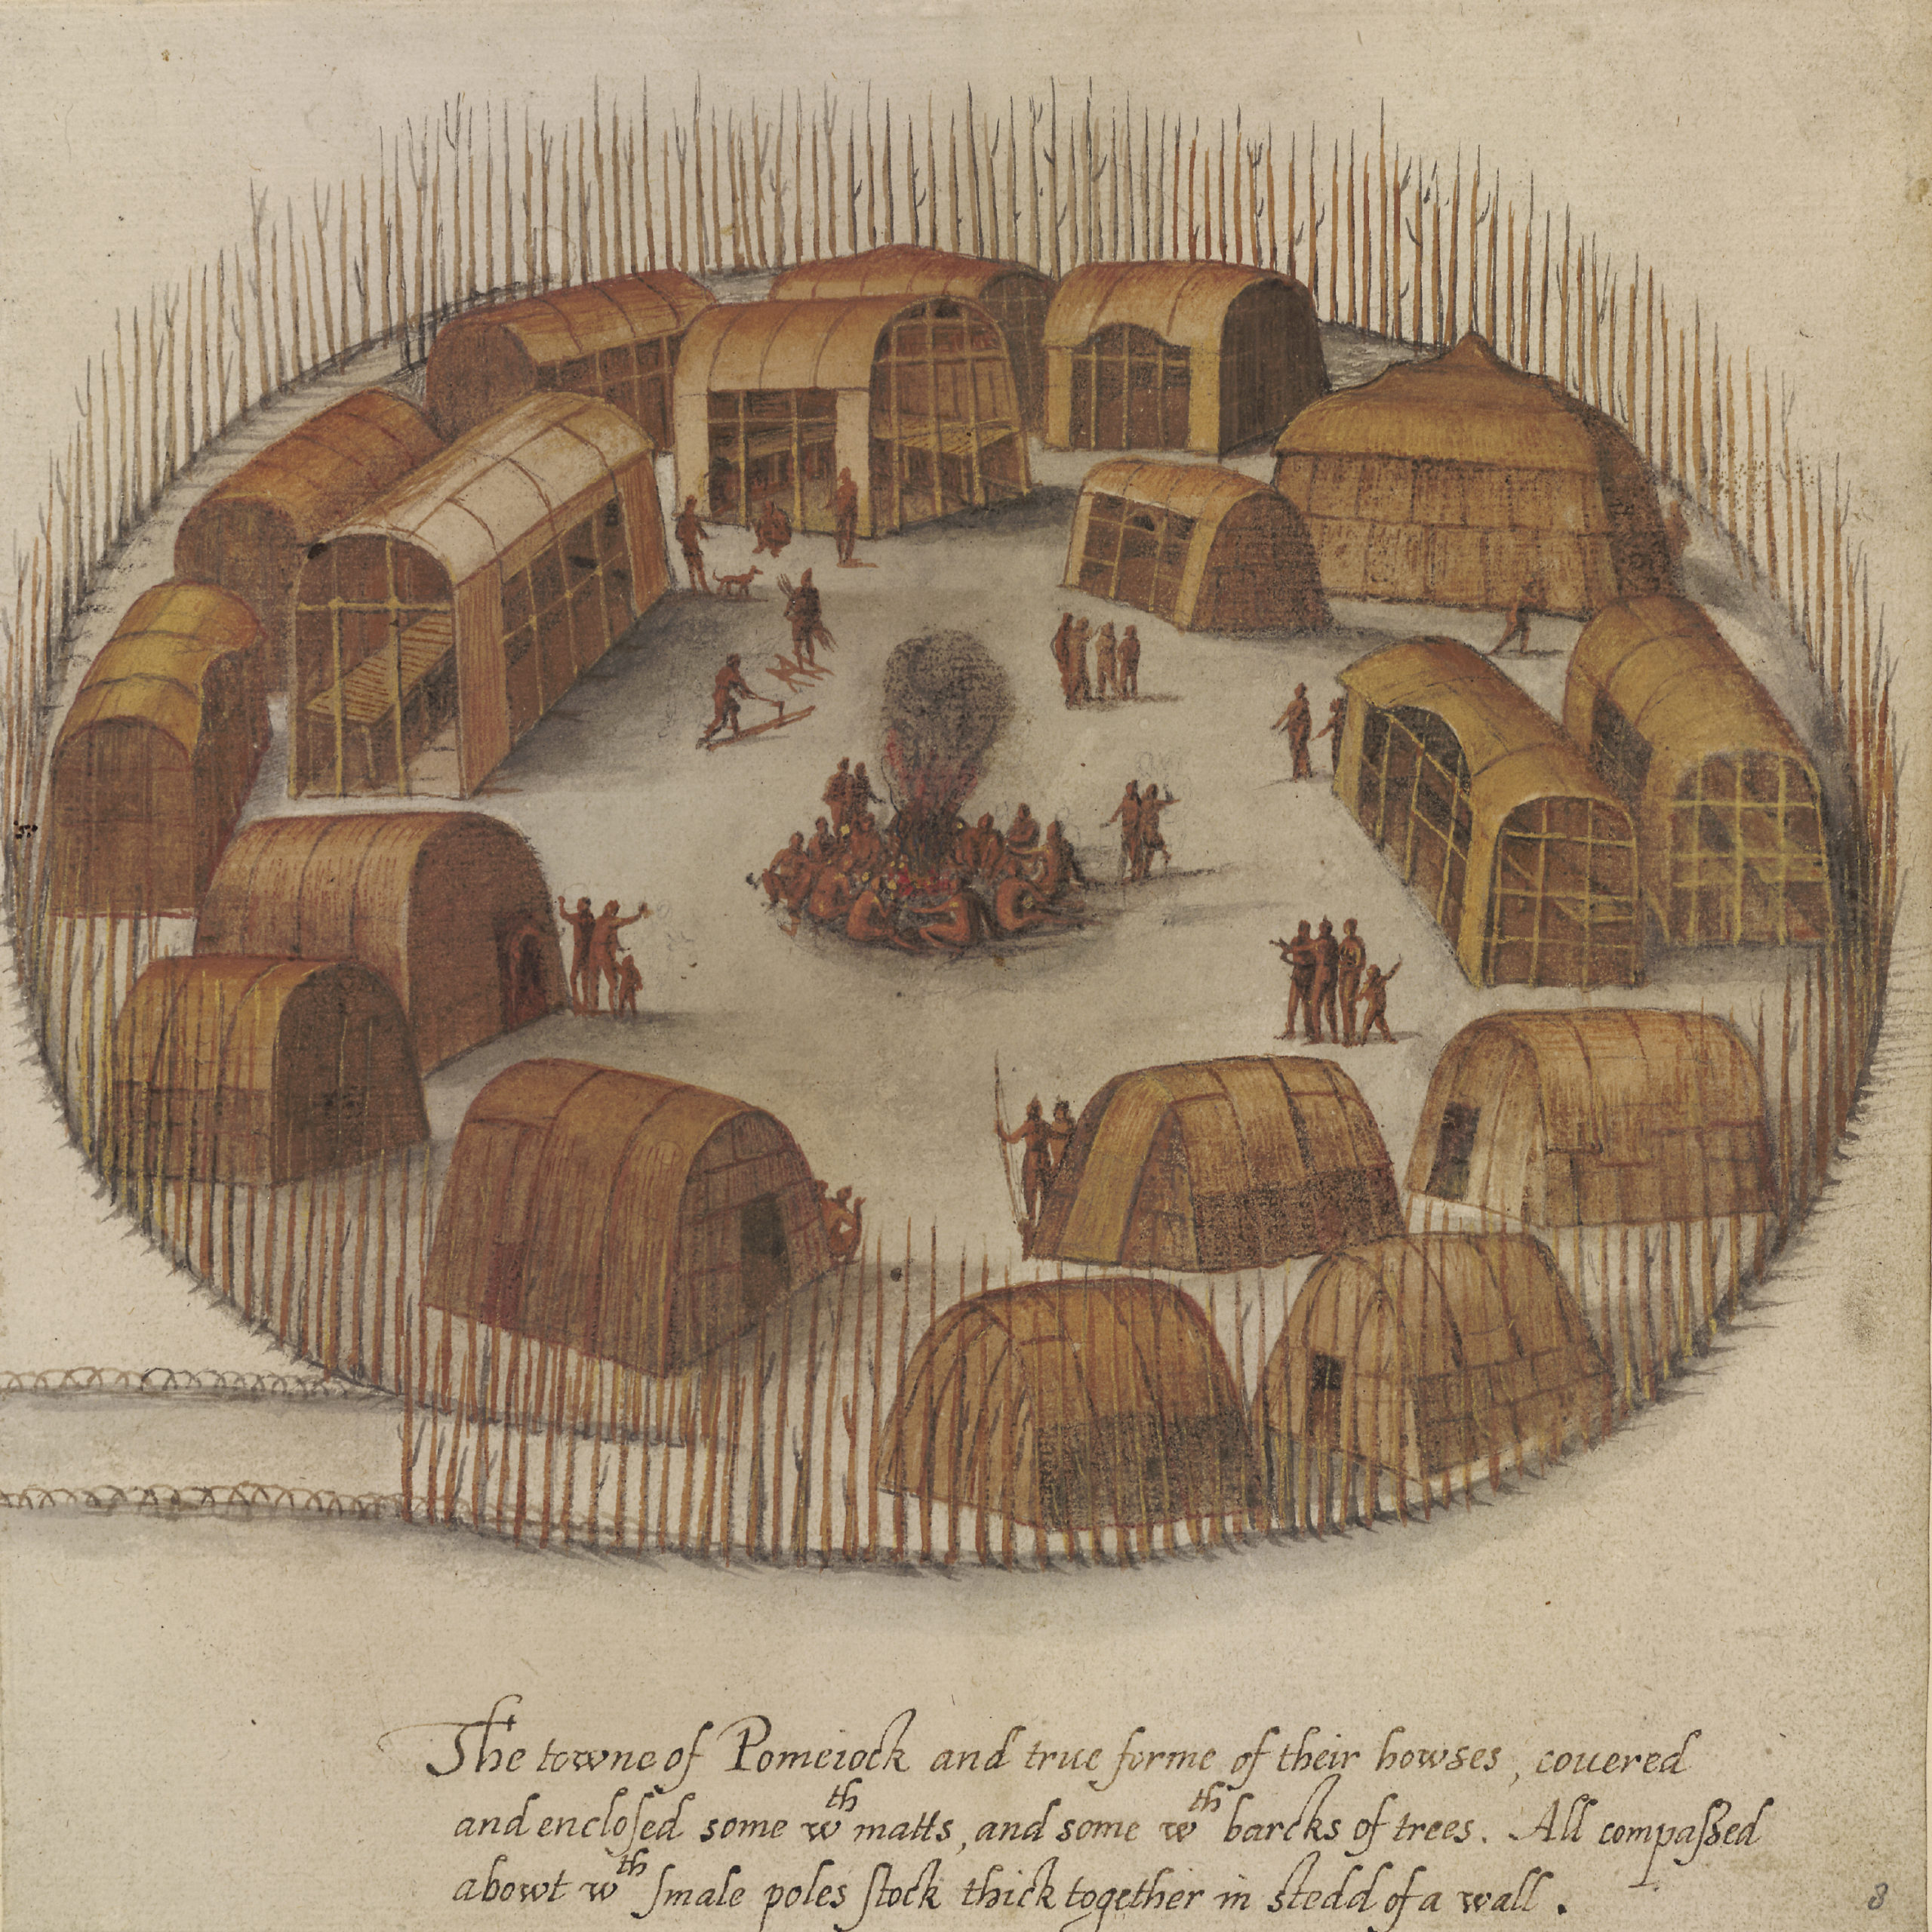 New Discoveries Could Explain What Happened To The Lost Colony Of Roanoke